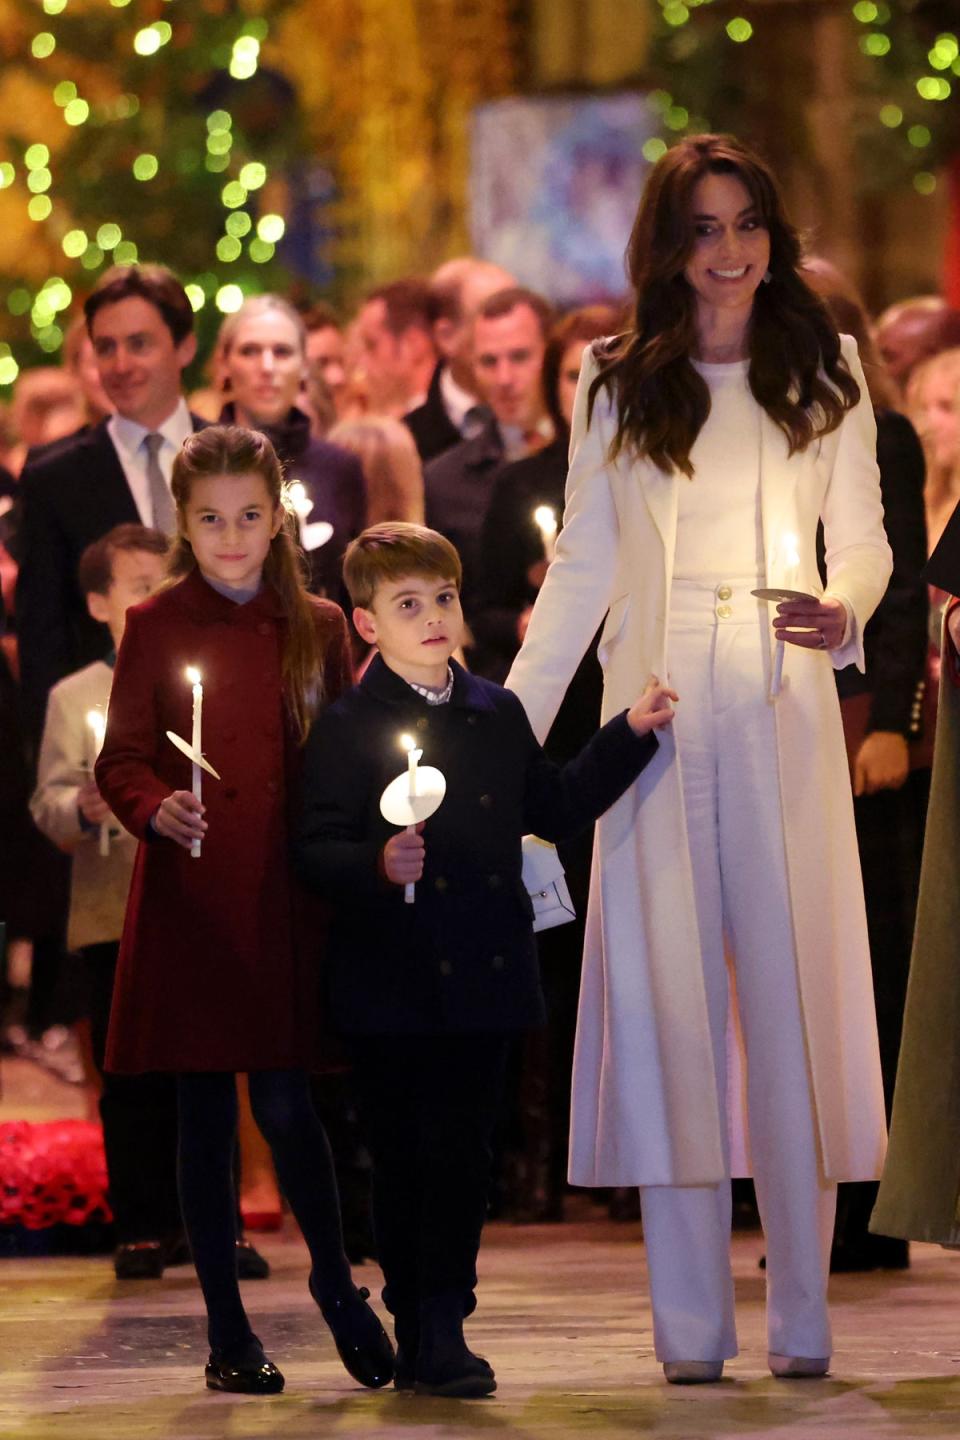 Prince Louis and Princess Charlotte dutifully hold candles at their mother’s event (Chris Jackson/PA Wire)